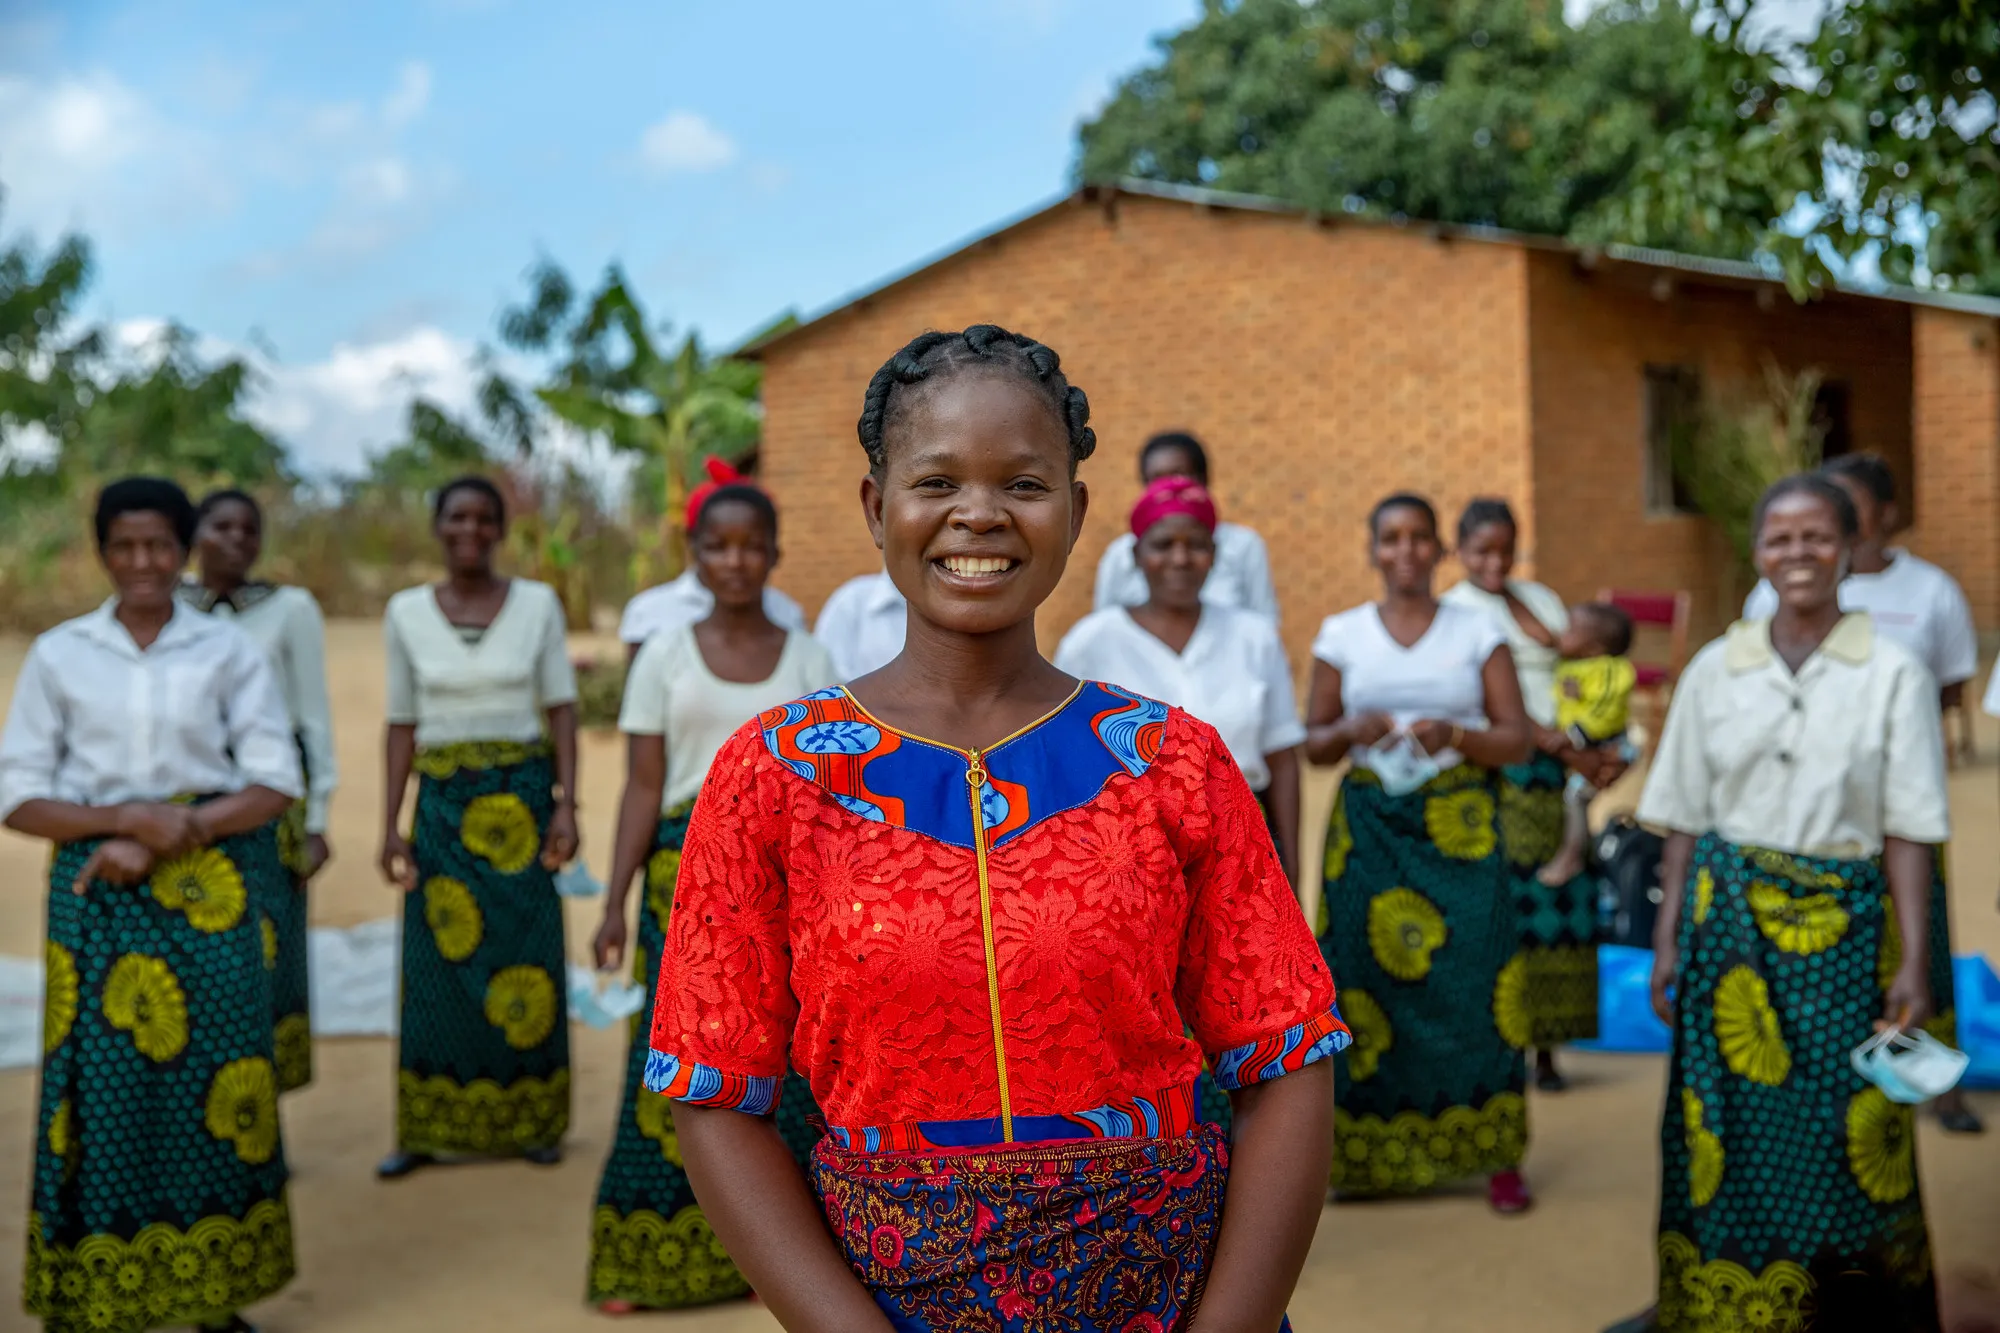 A Malawian woman wearing a bright red shirt smiles in the center of the photo. Behind her, a group of women in matching patterned skirts and white shirts stand in a semi circle.